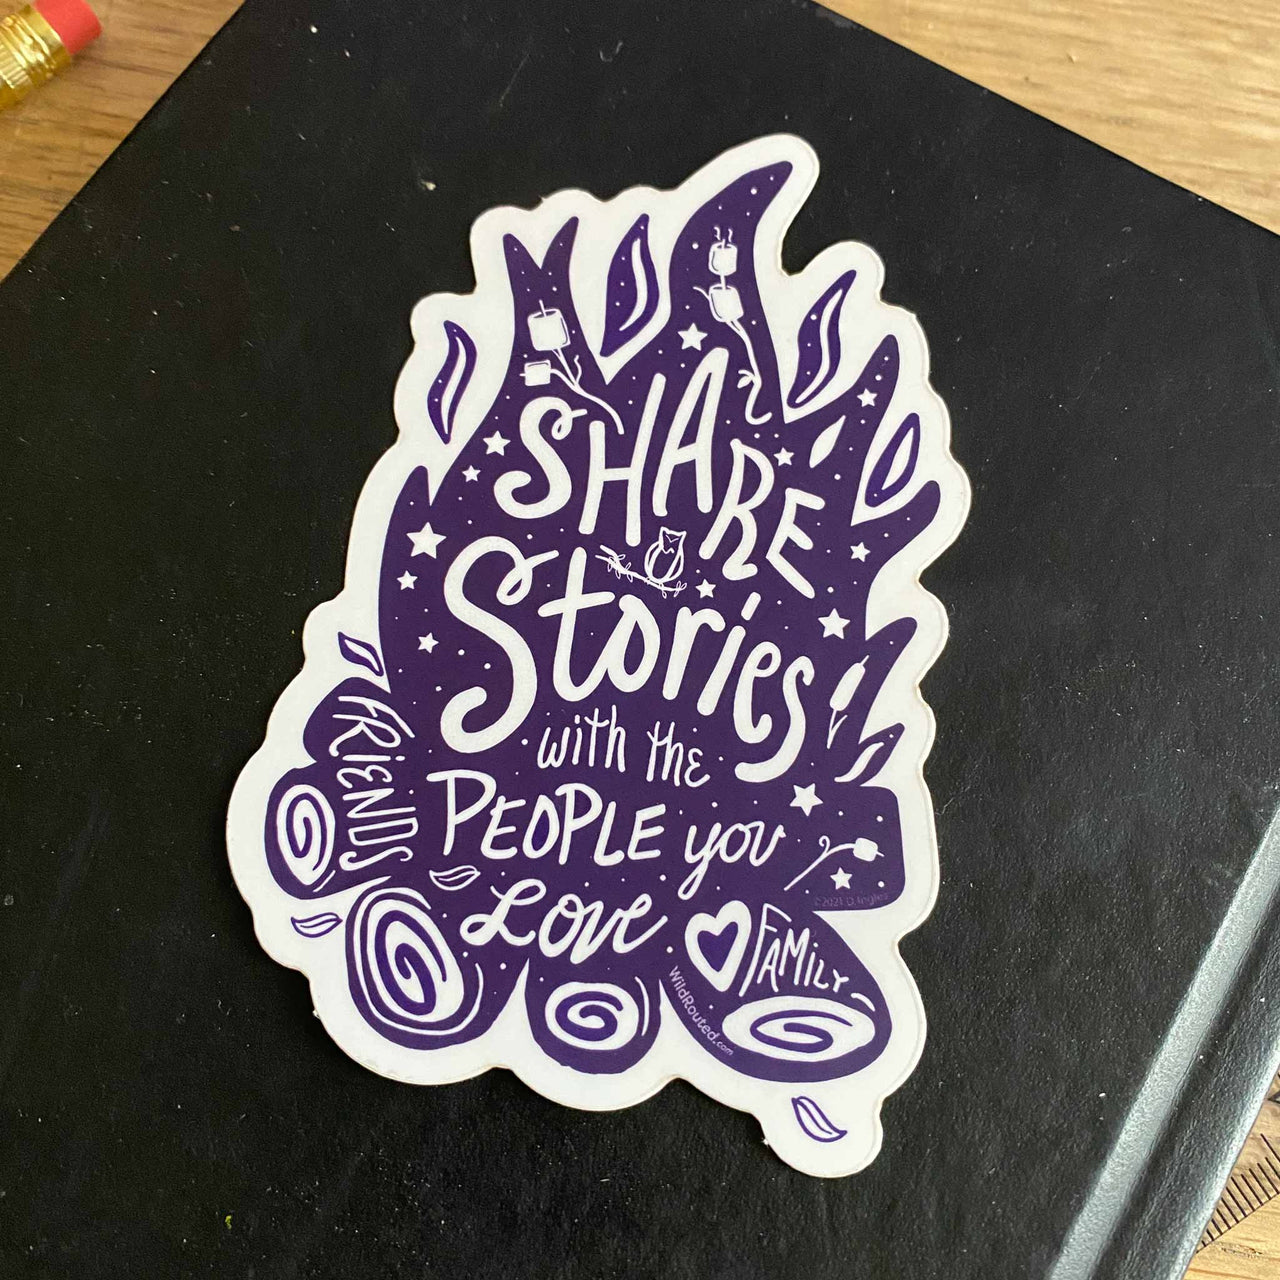 Wild Routed Share Stories With The People You Love Sticker On Sketchbook